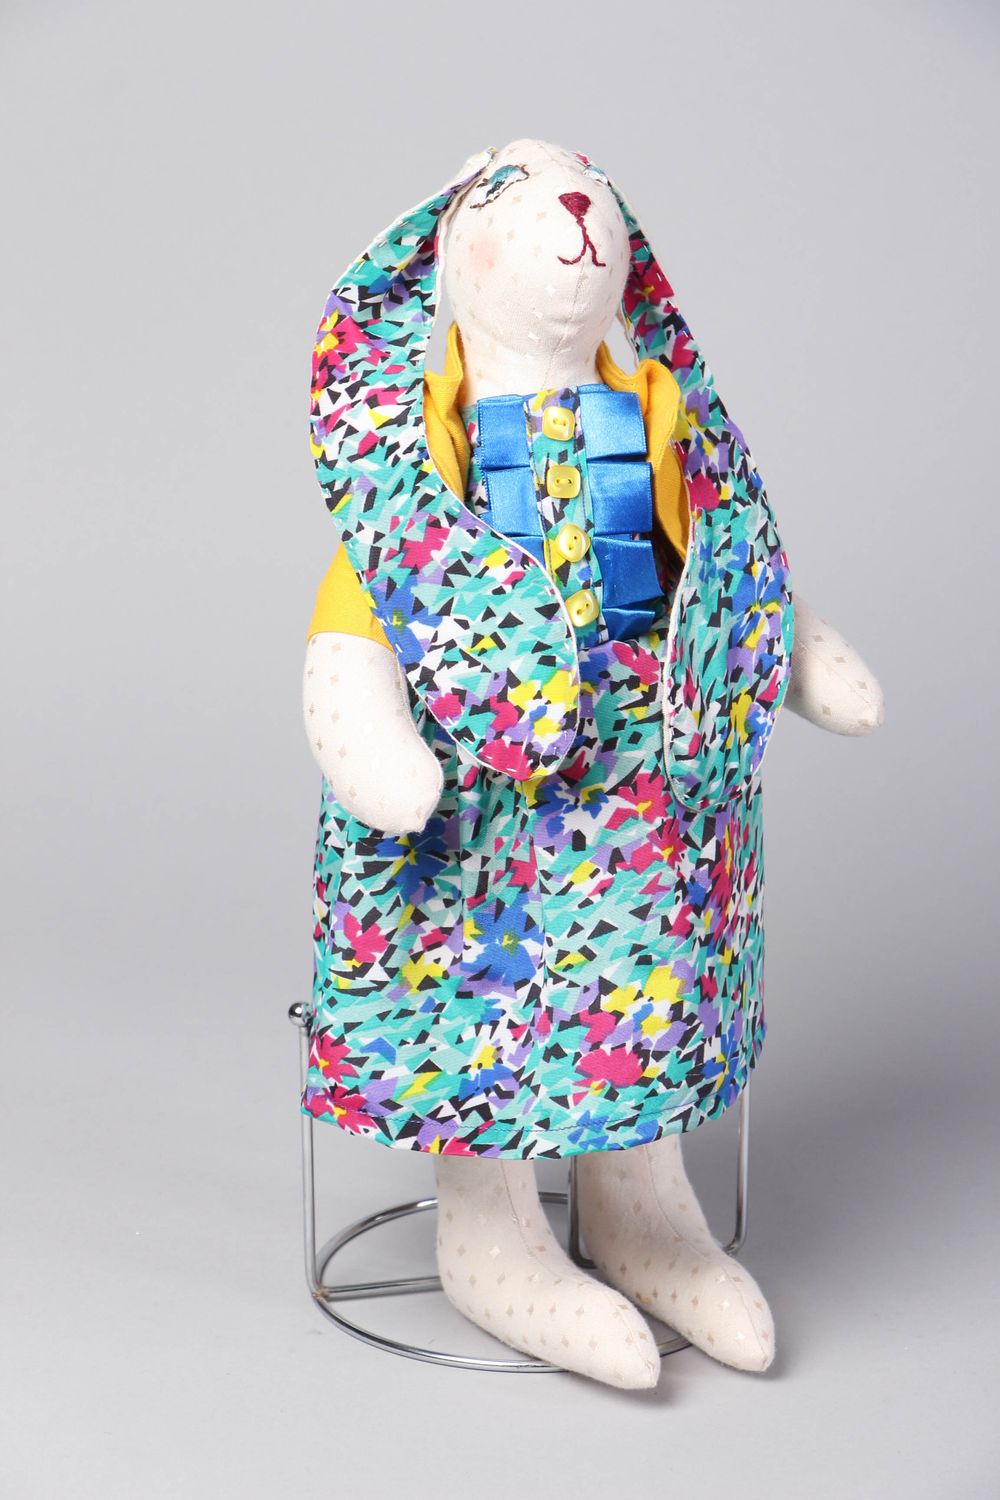 Fabric doll with stand Long-Eared Bunny photo 1